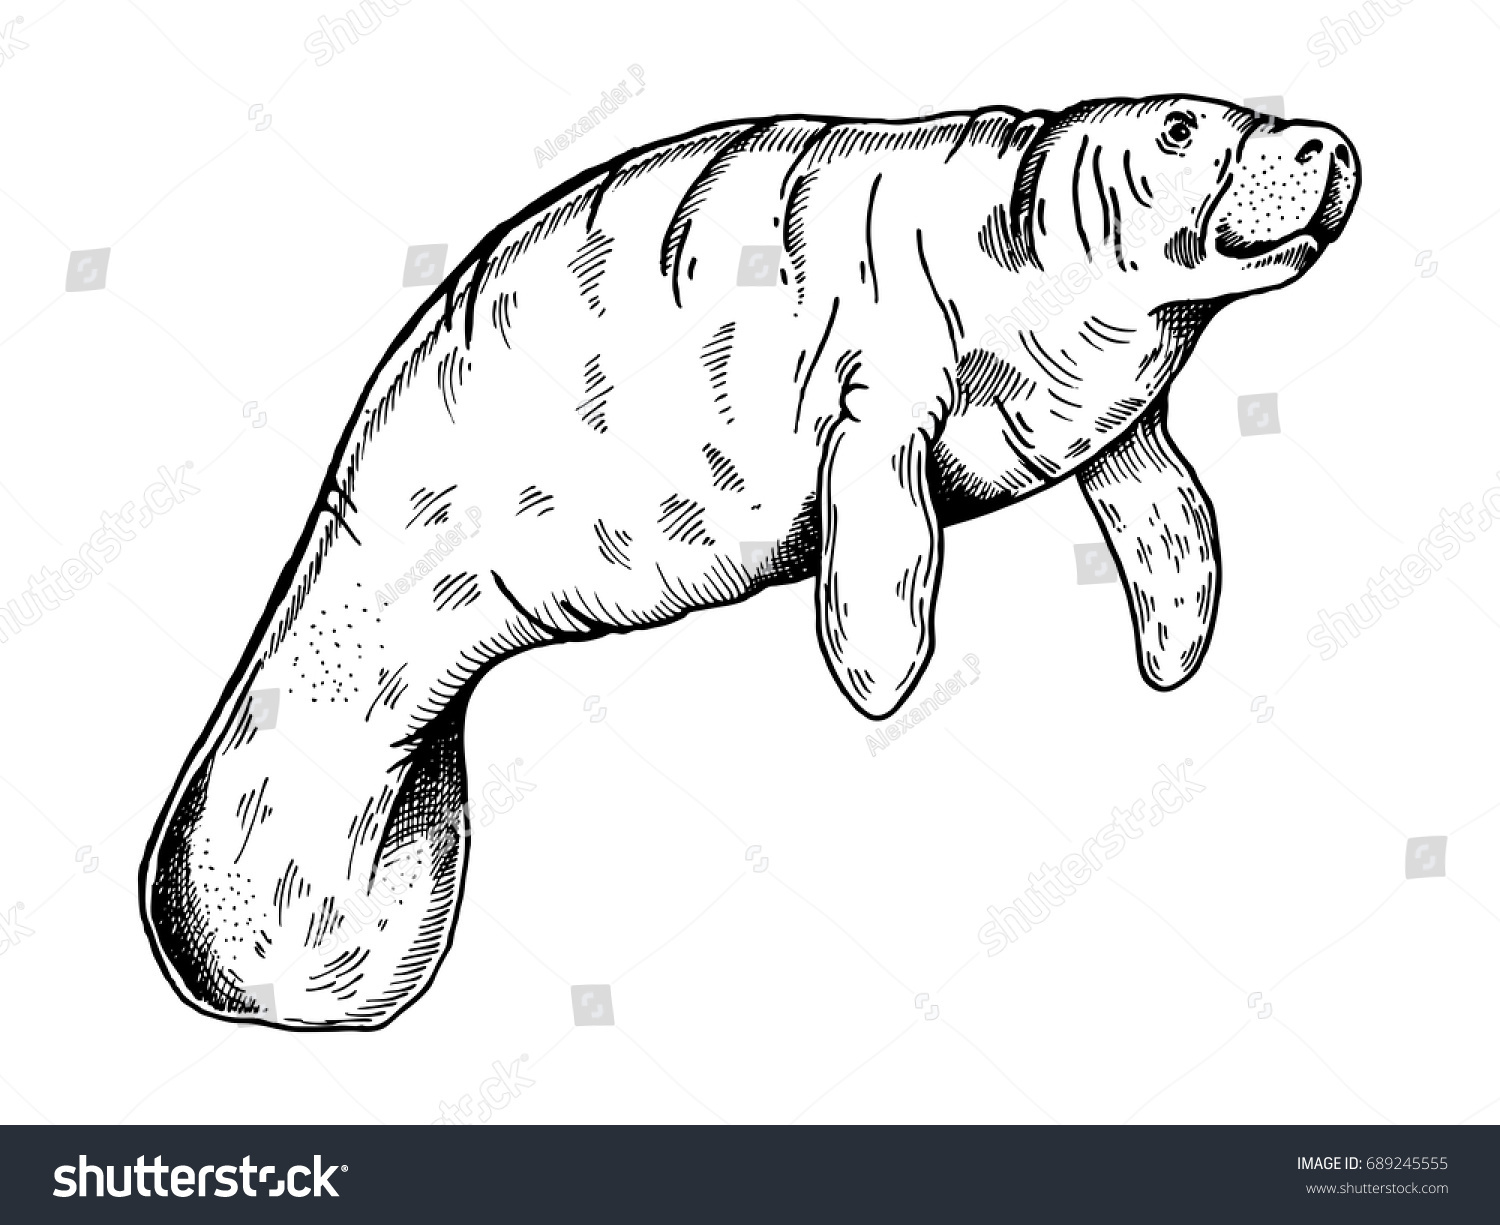 SVG of Manatee water animal engraving vector illustration. Scratch board style imitation. Hand drawn image. svg